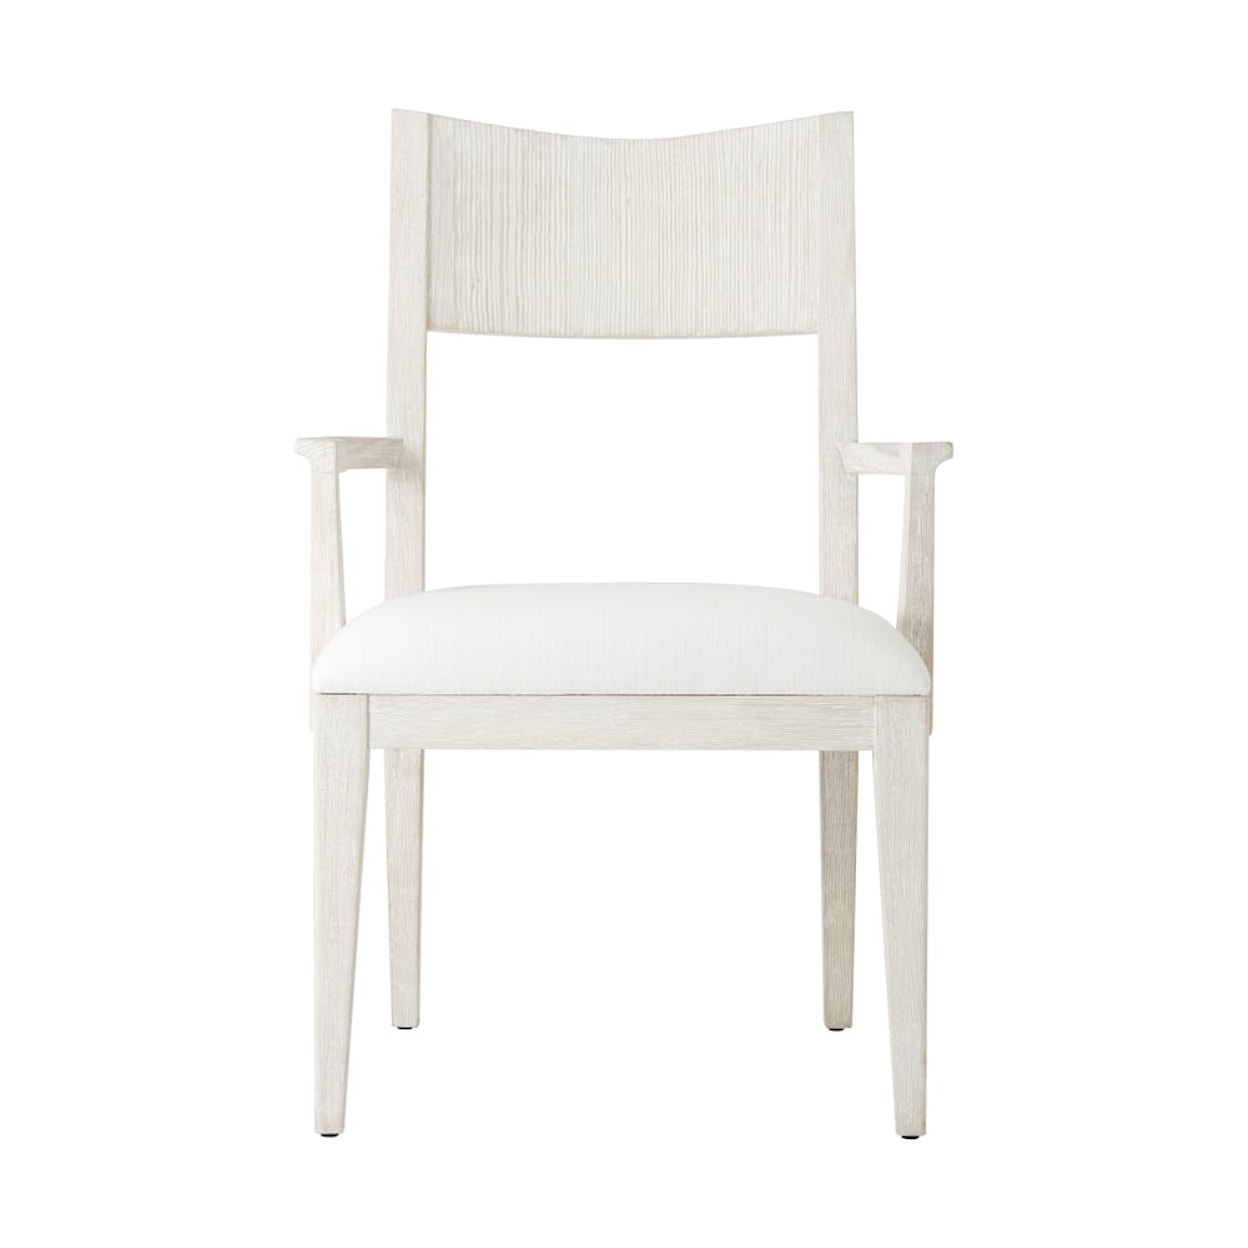 Theodore Alexander Breeze Arm Chair with Upholstered Cushion